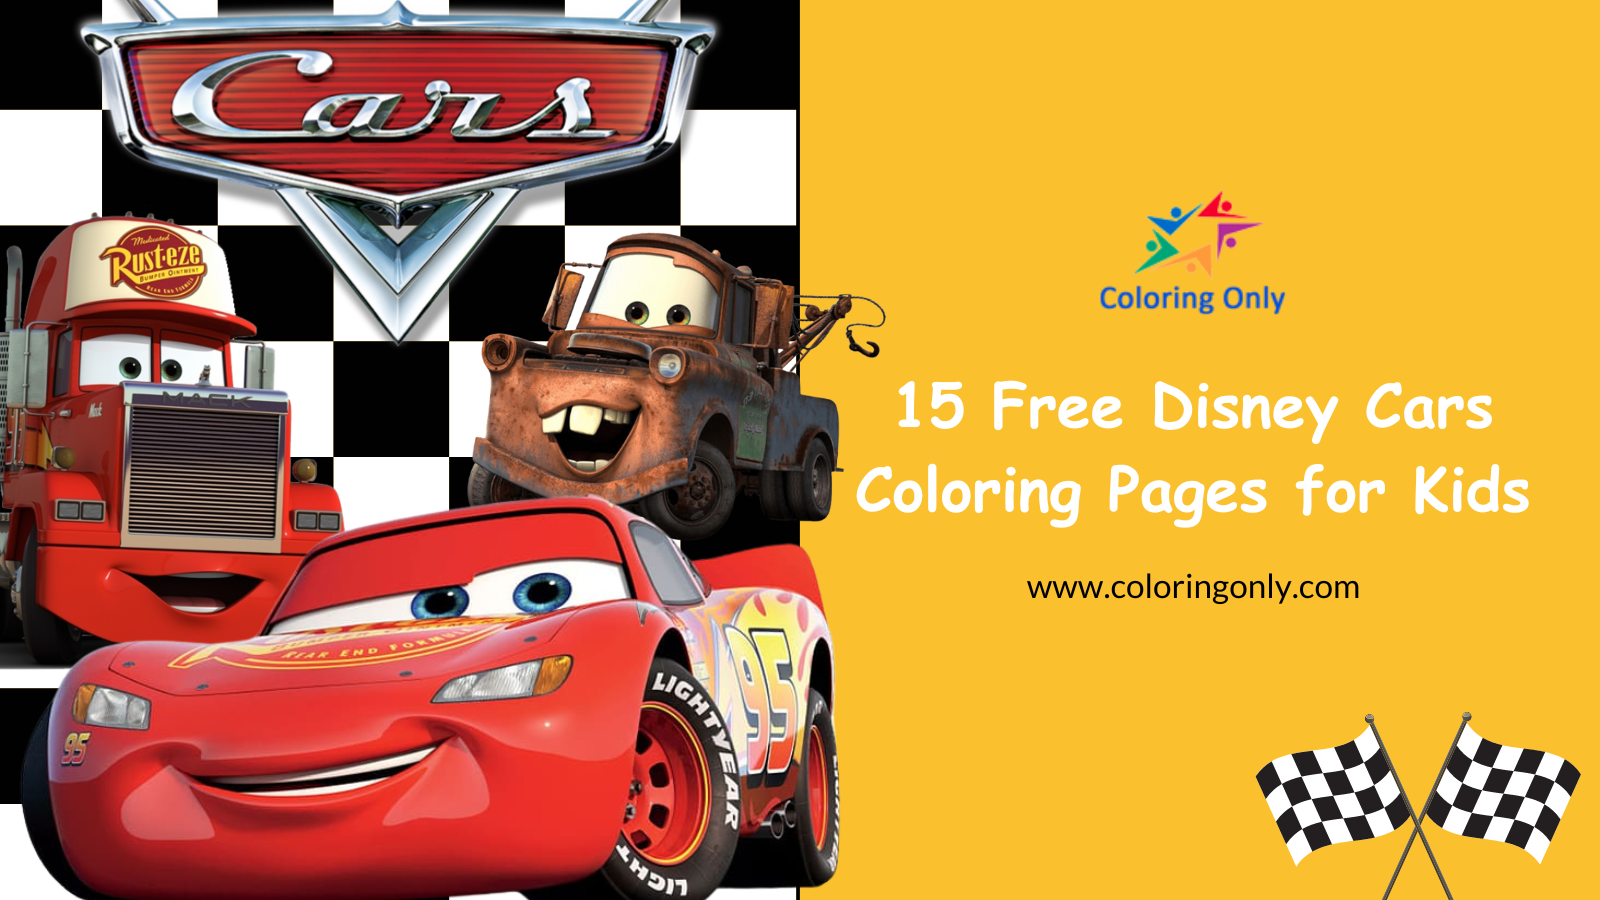 15 Free Disney Cars Coloring Pages for Kids